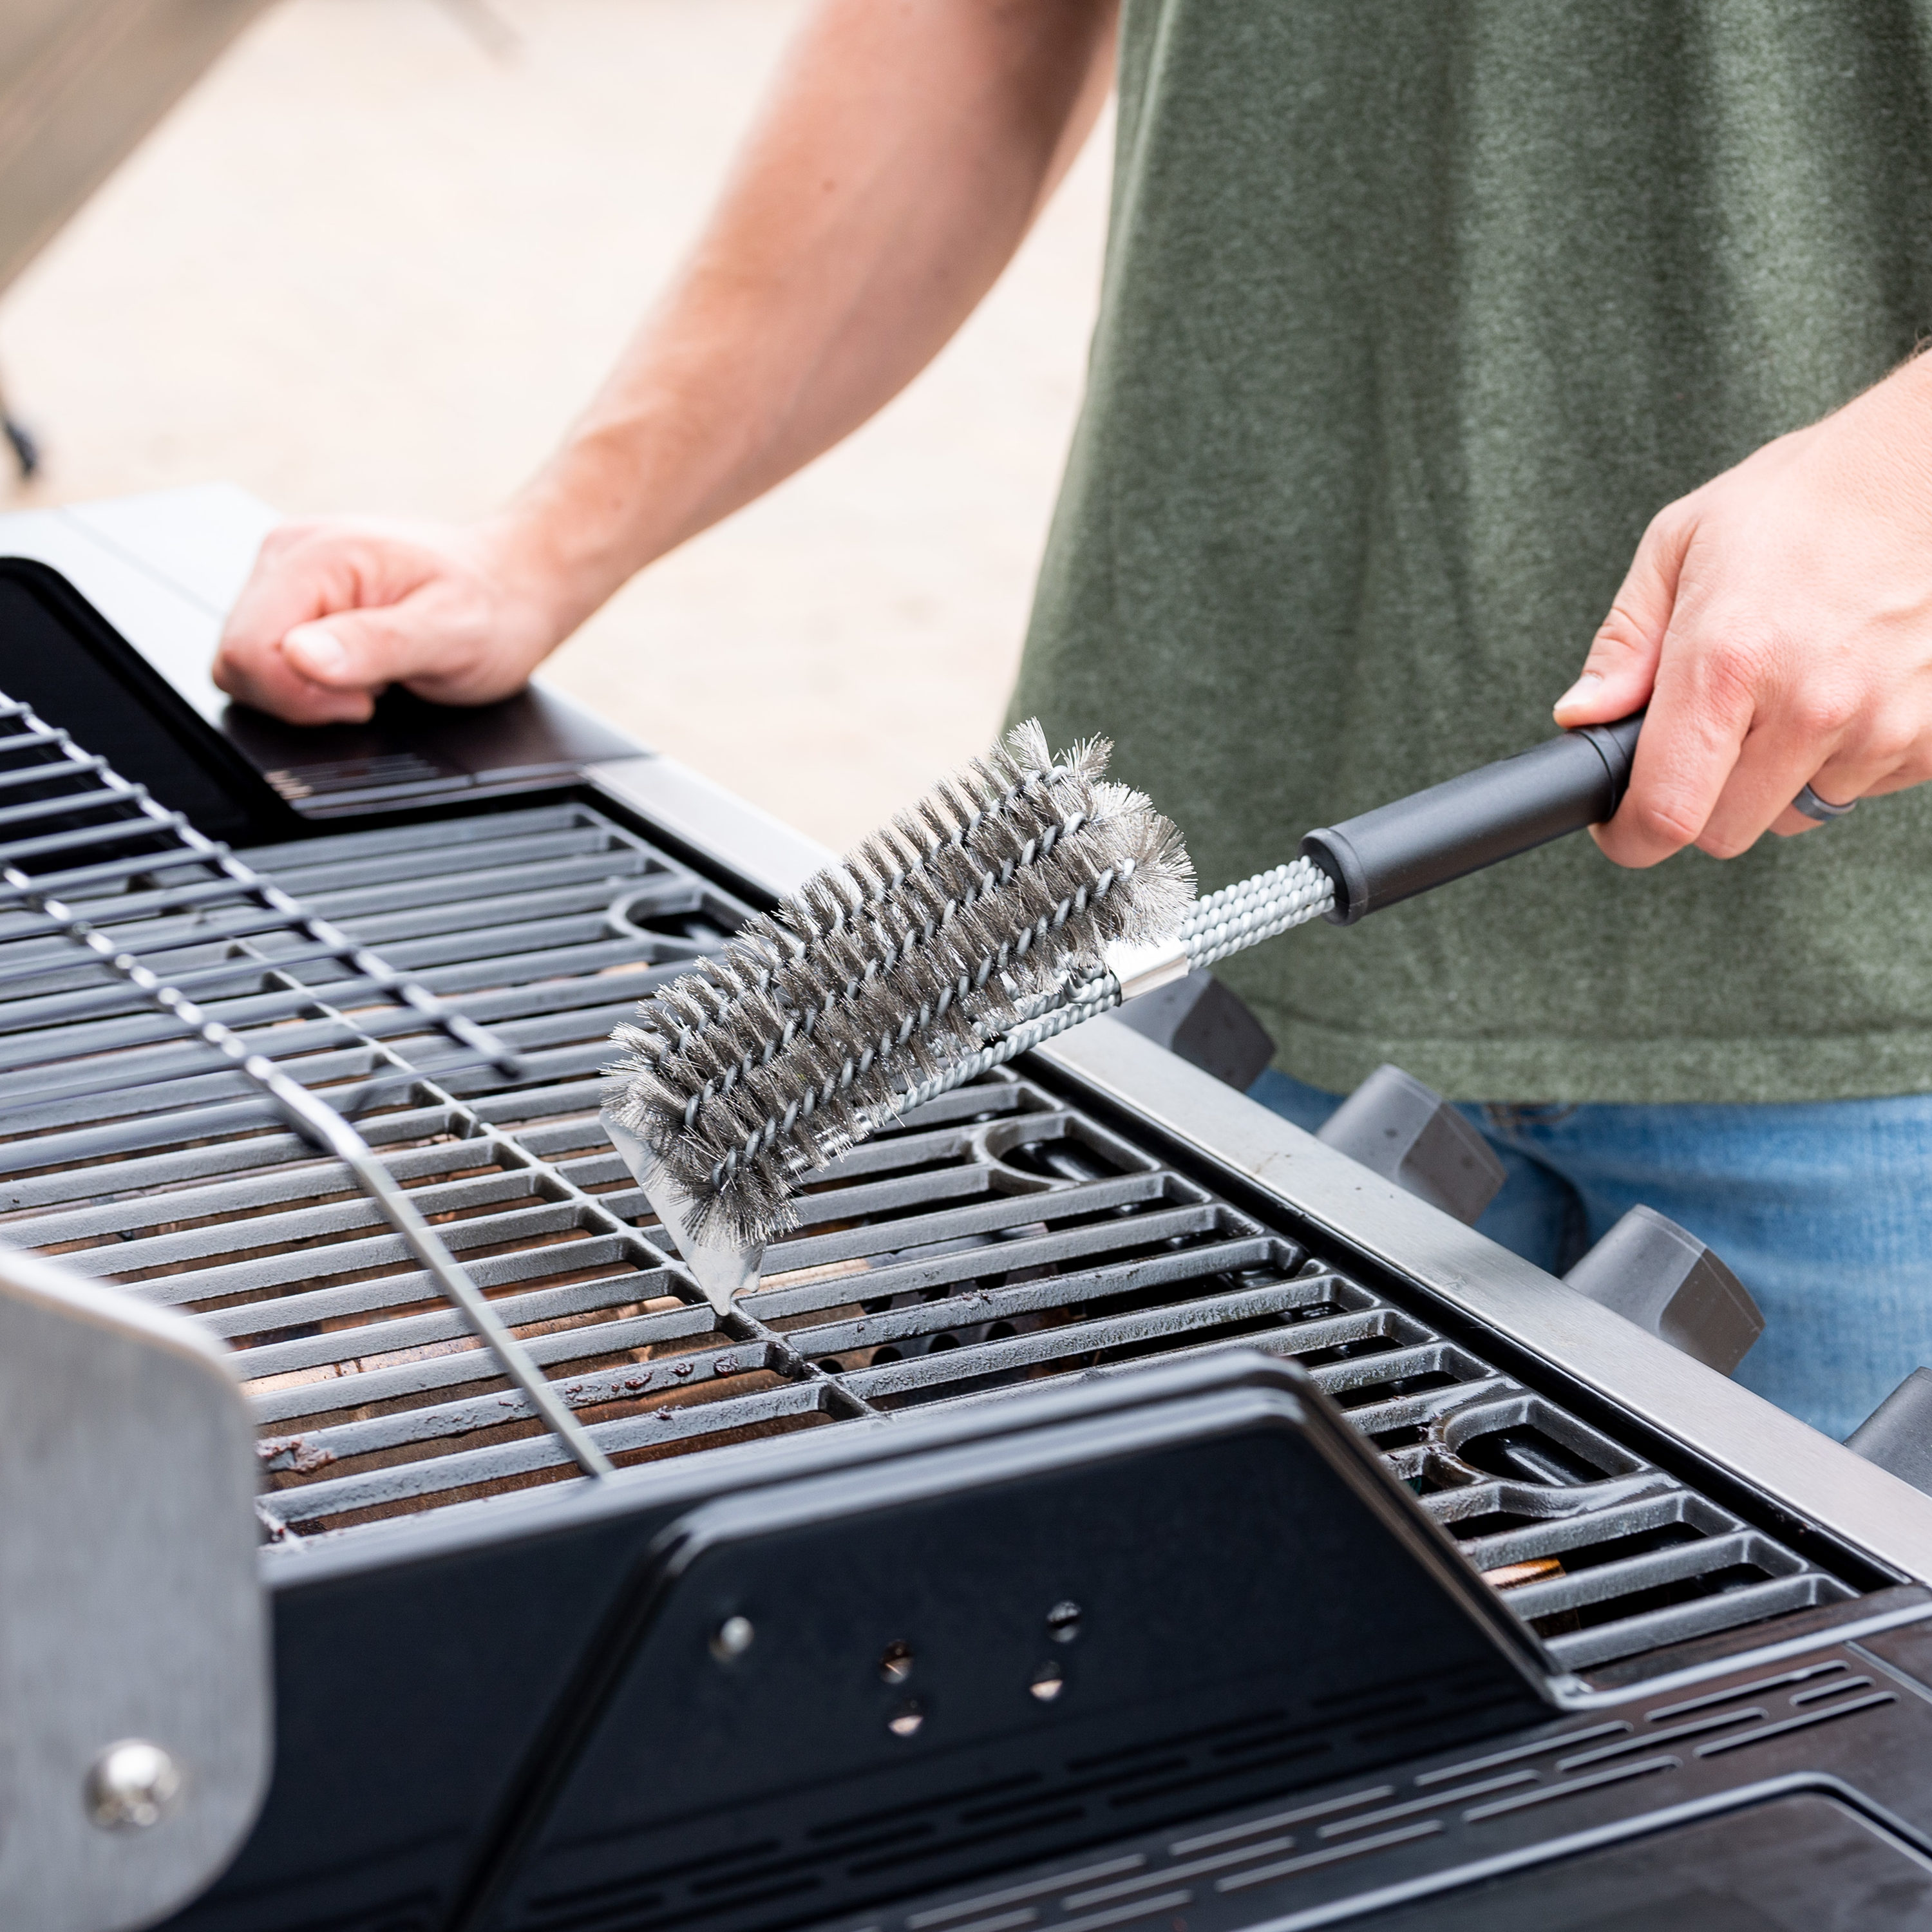 Grill Brush and Scraper - Grill Cleaner Brush Grill Accessories for Outdoor  Grill - Safe BBQ Brush for Grill Cleaning - Heavy Duty 17 Grill Brushes